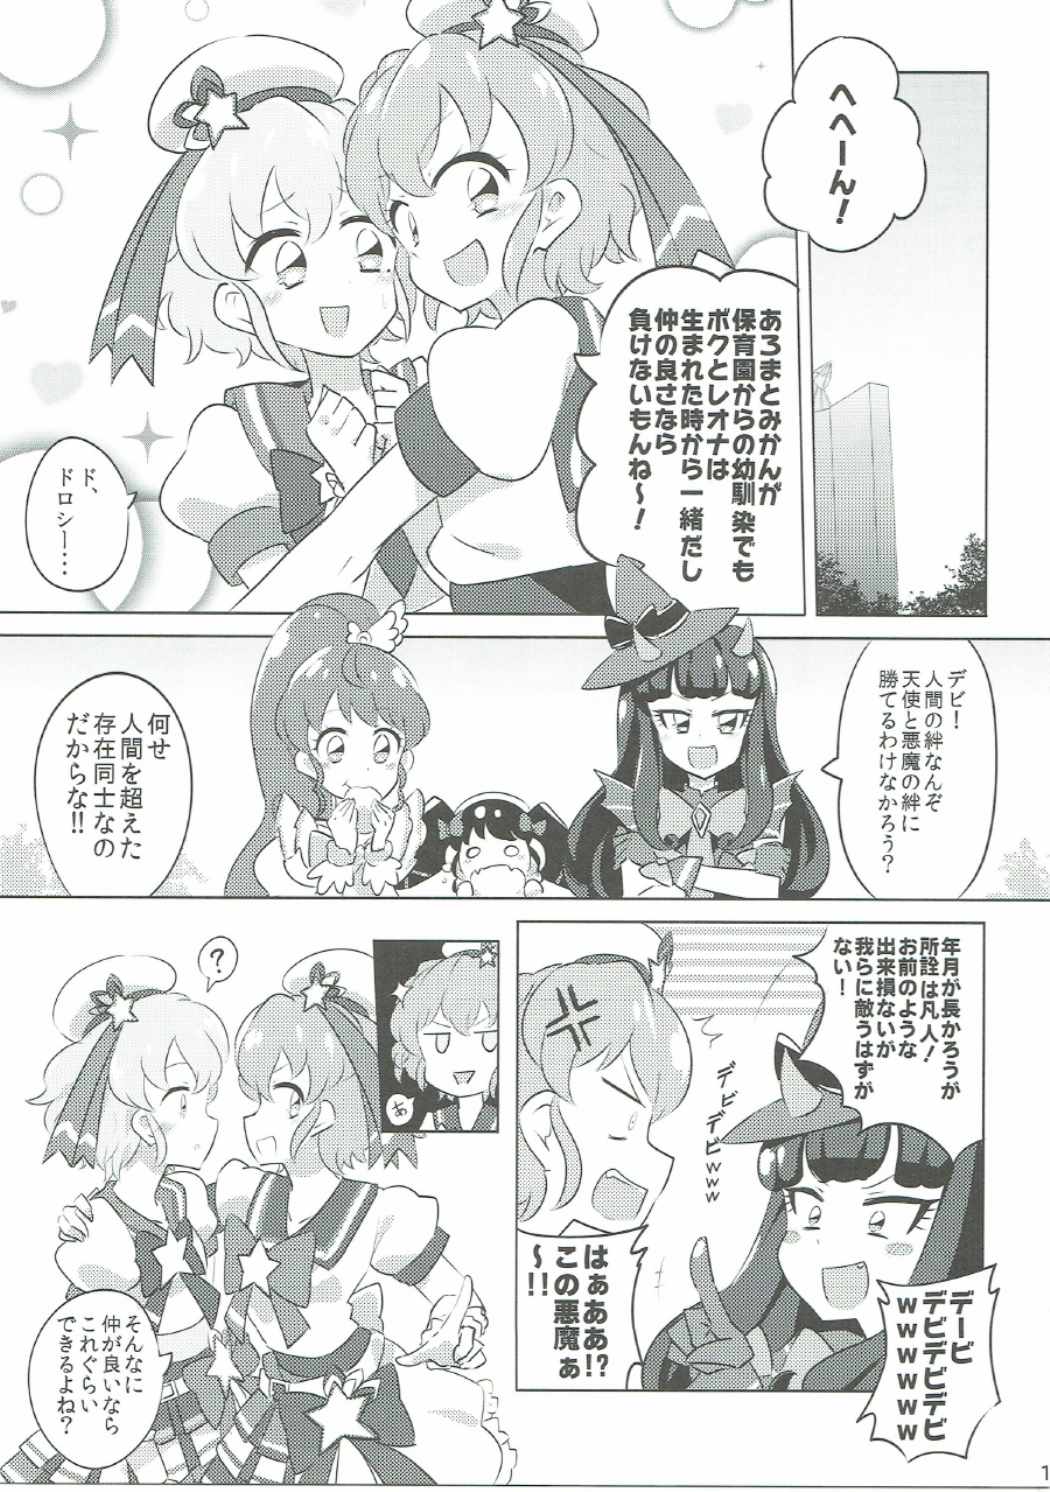 (On the Stage 5) [Gake no Ue no Aho (AHO)] The Gaarmagedon Times (PriPara) page 14 full